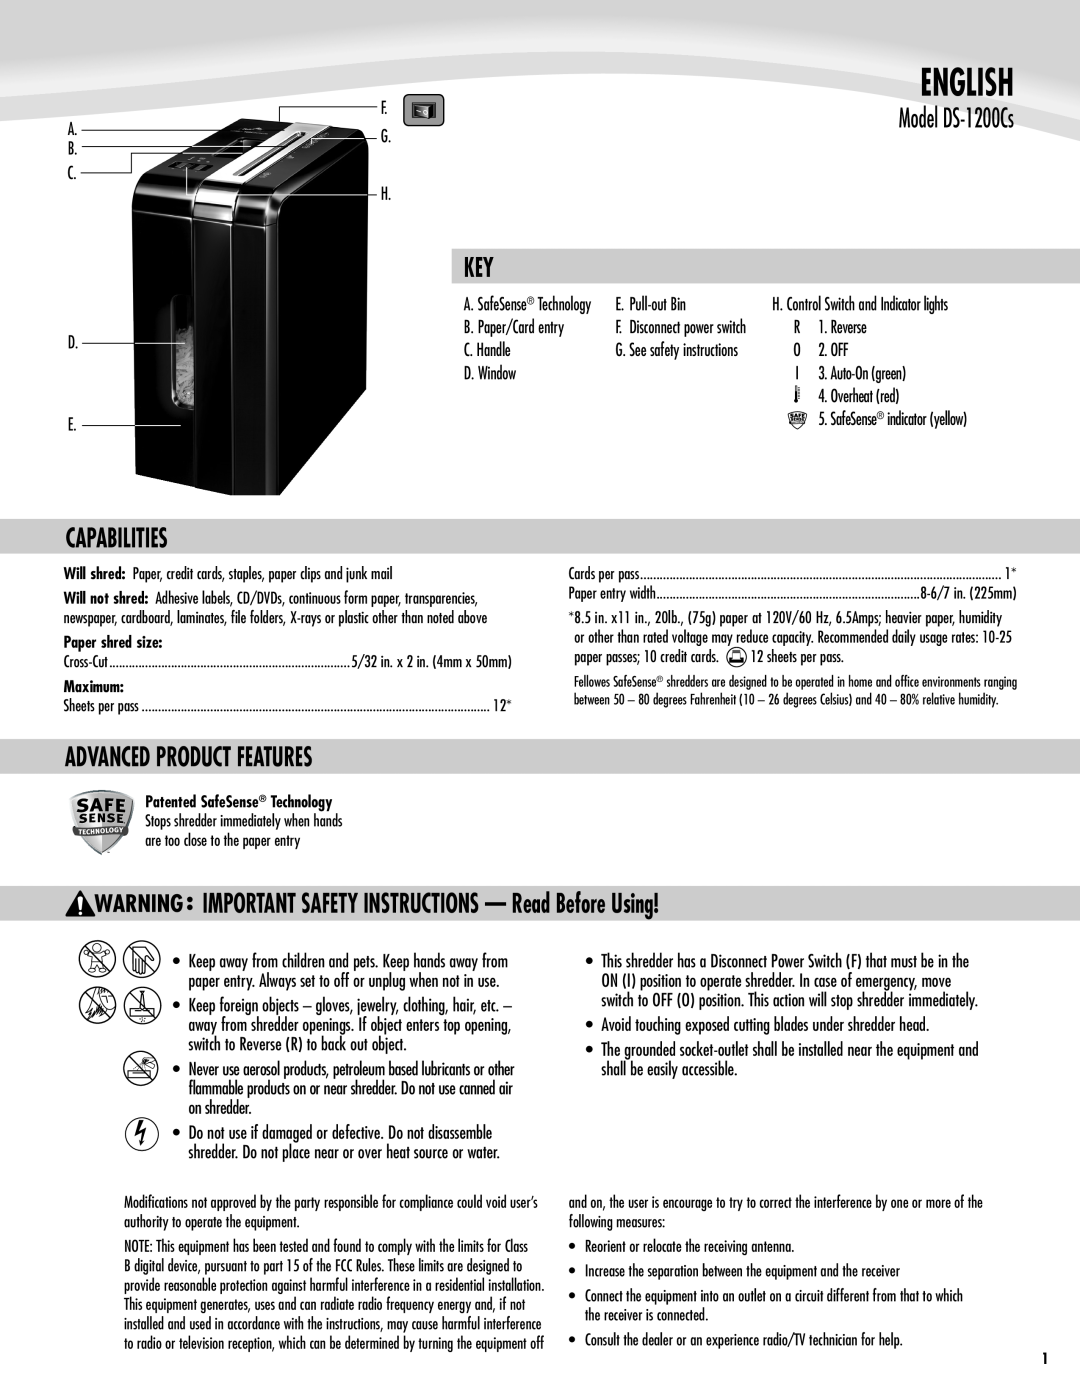 Fellowes DS-1200C Capabilities, Advanced Product Features, IMPORTANT SAFETY INSTRUCTIONS - Read Before Using, English 